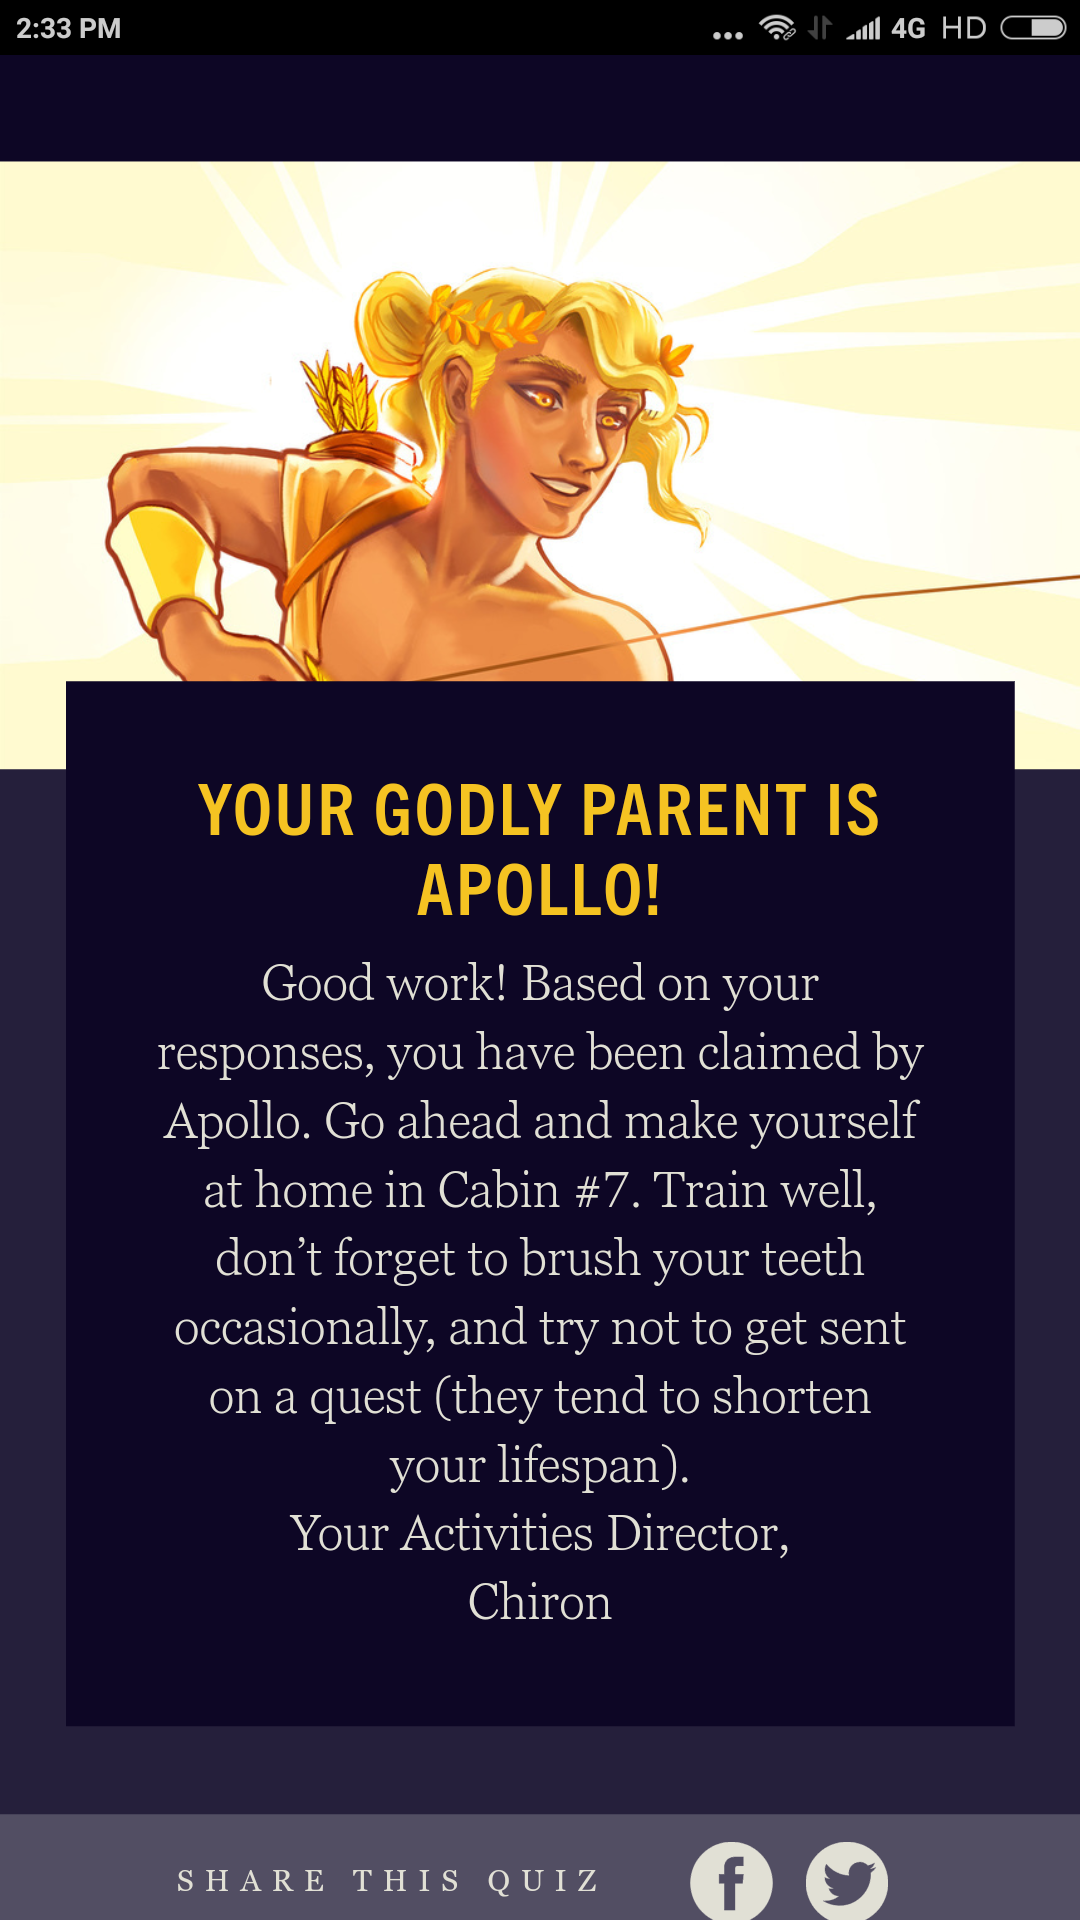 Percy Jackson~ Who is your godly parent?